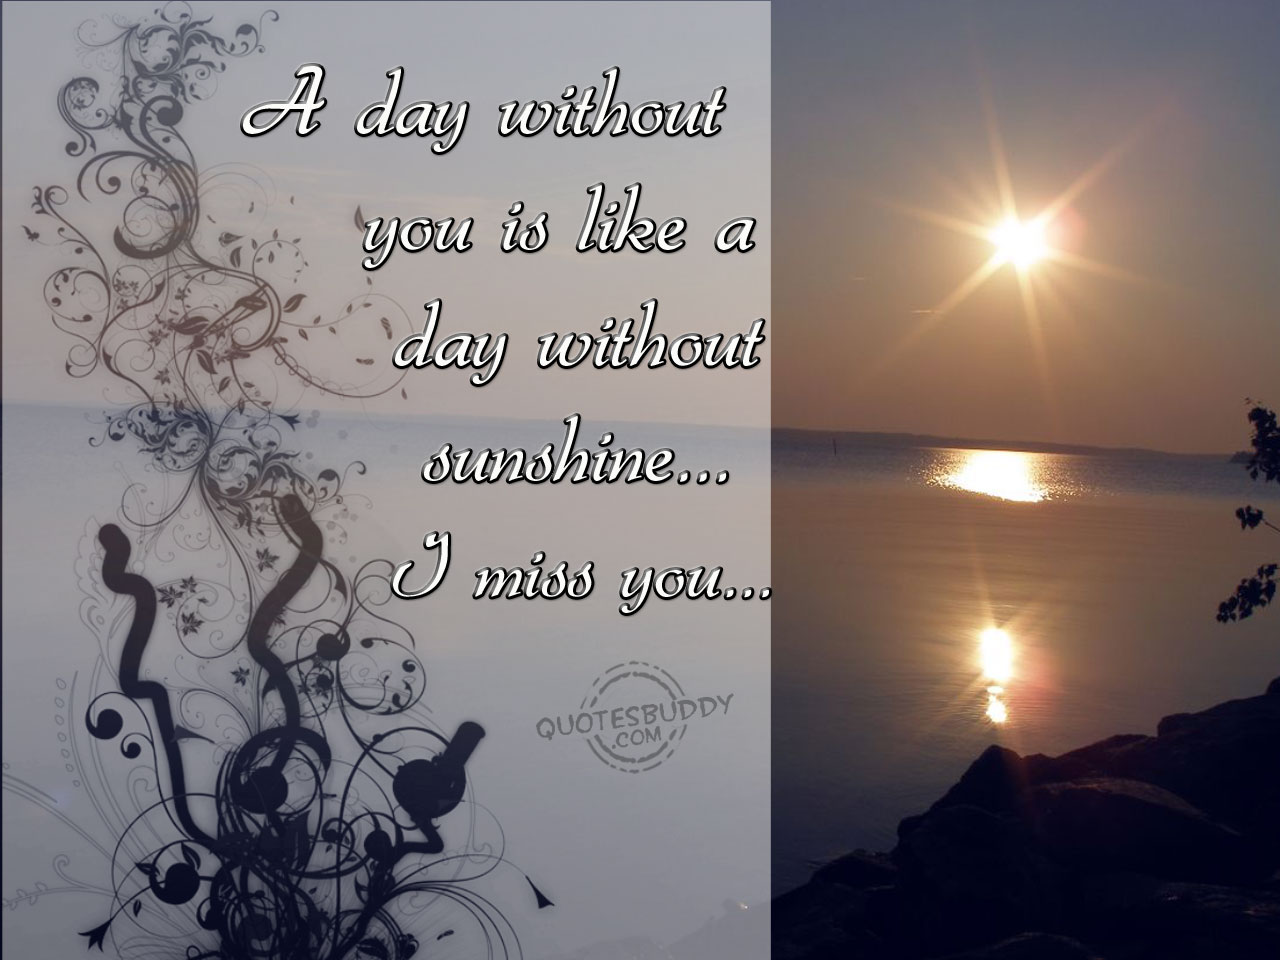 Miss You Quotes HD Wallpaper In Love Imageci